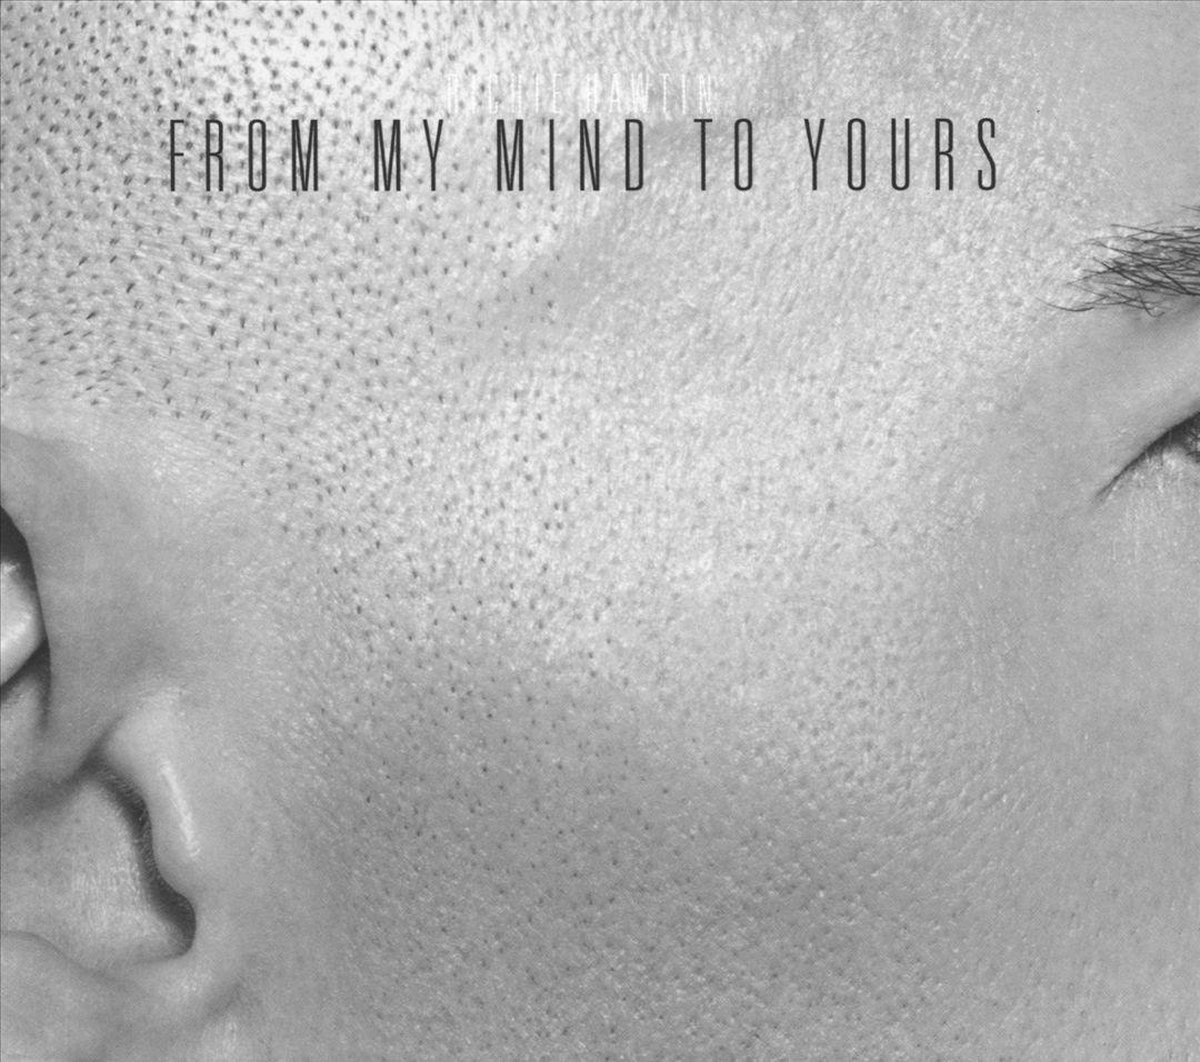 From My Mind To Yours - Richie Hawtin